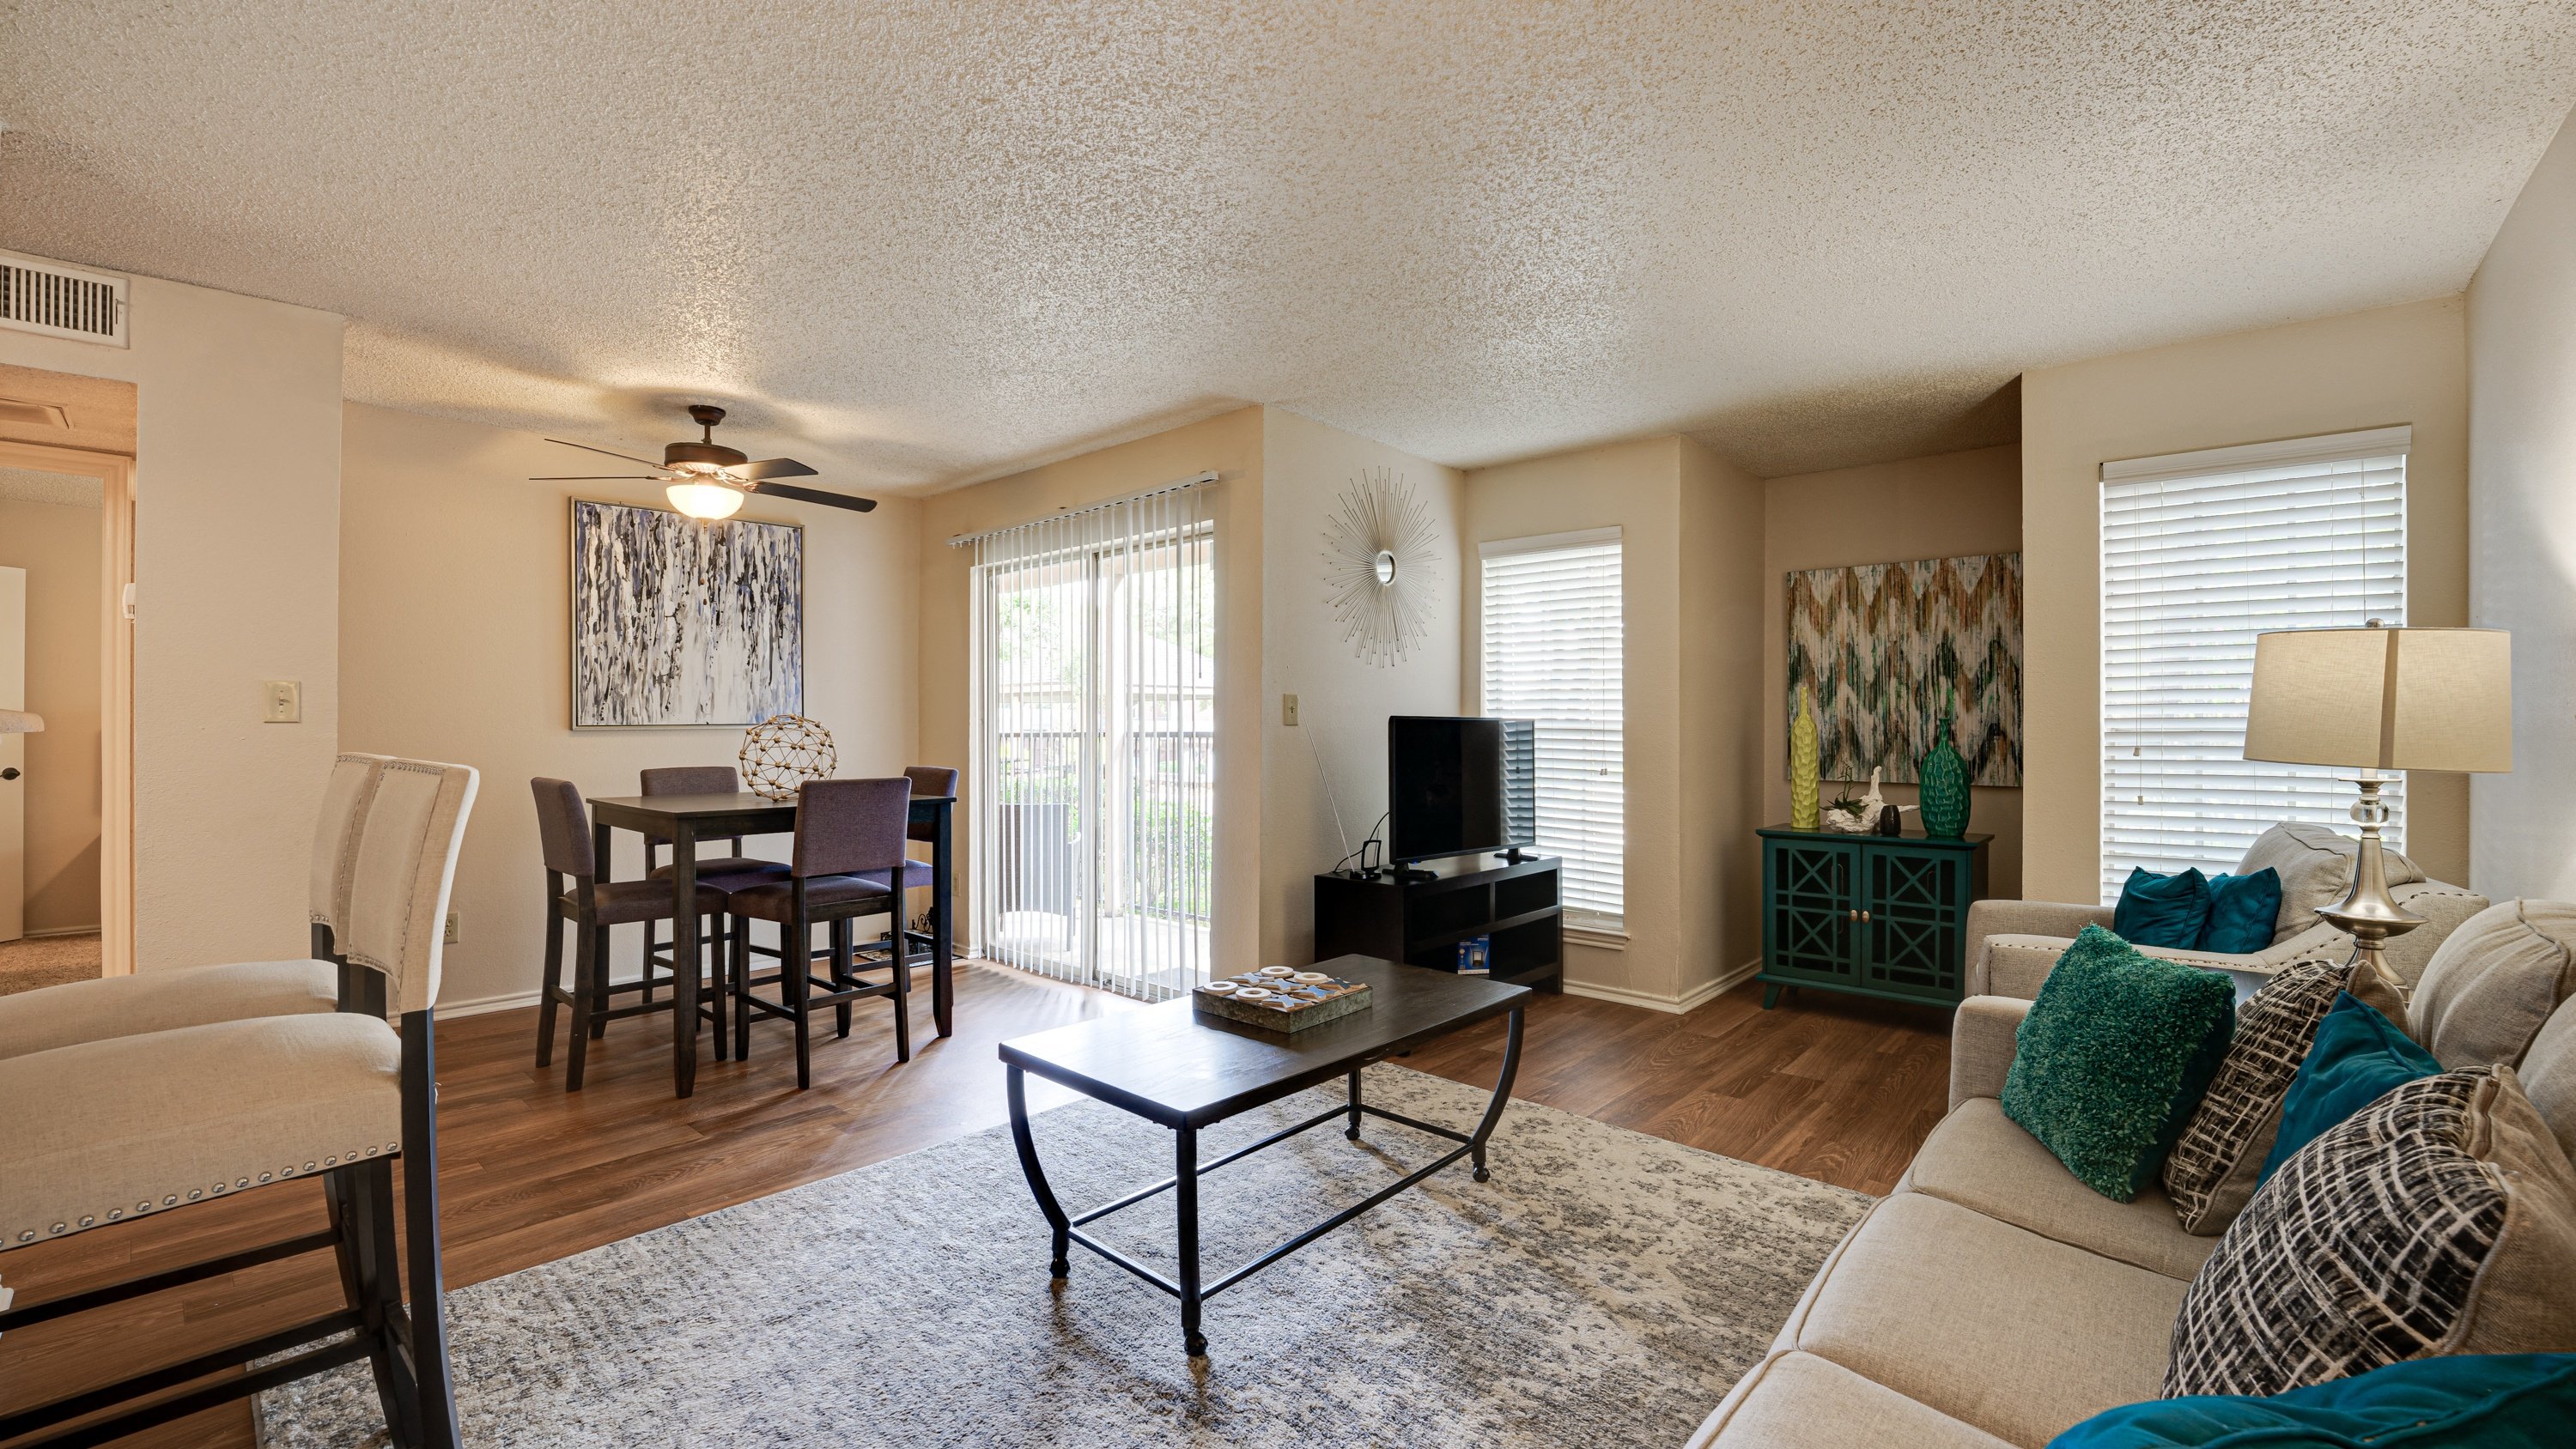 Living Room With Kitchen at Hunters Hill, Dallas, 75287